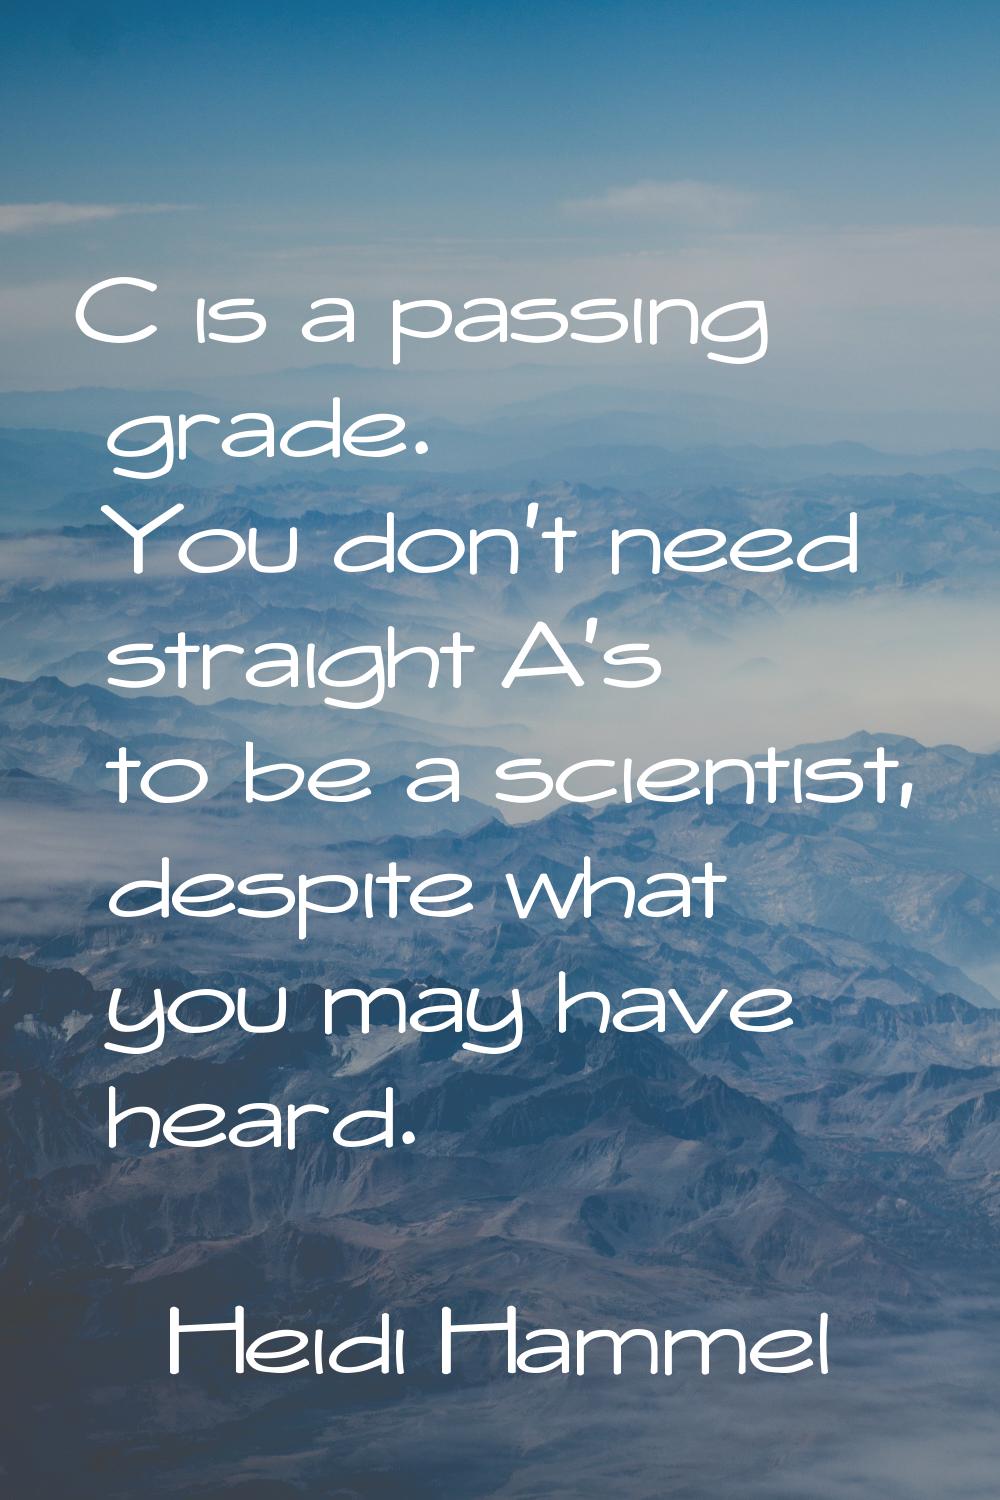 C is a passing grade. You don't need straight A's to be a scientist, despite what you may have hear